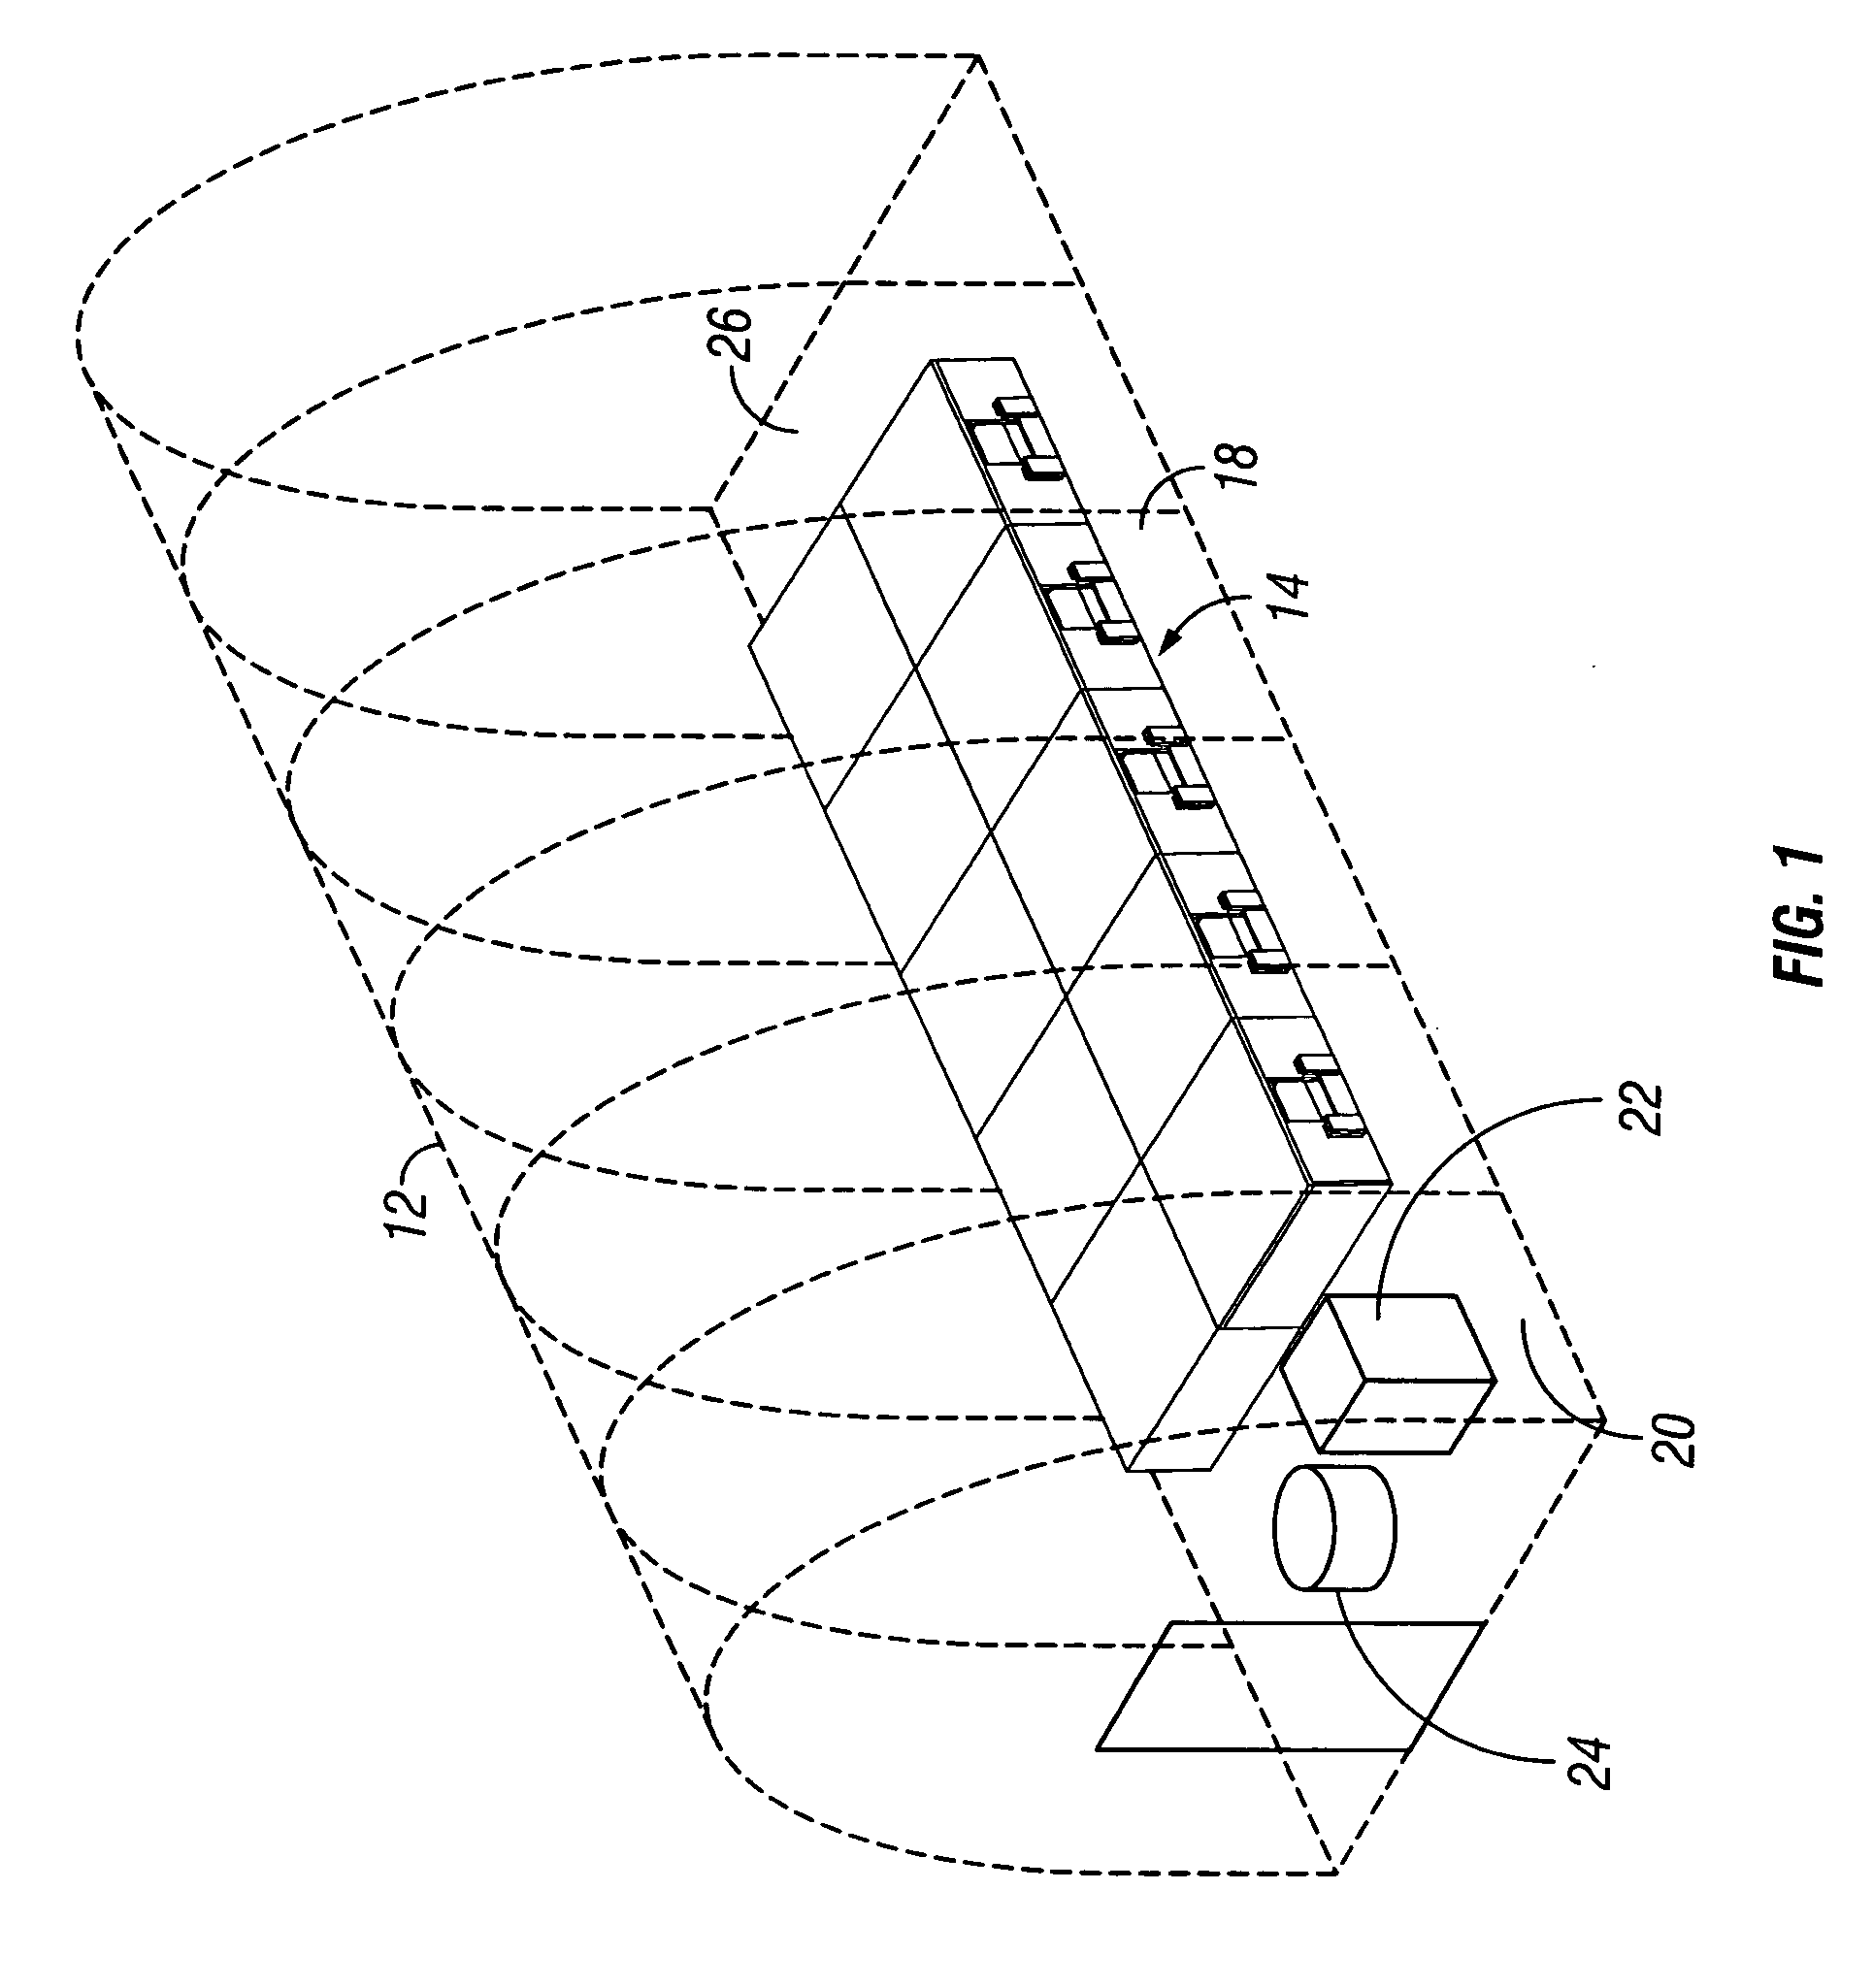 Hog farrowing system for use in a cold environment and method of use